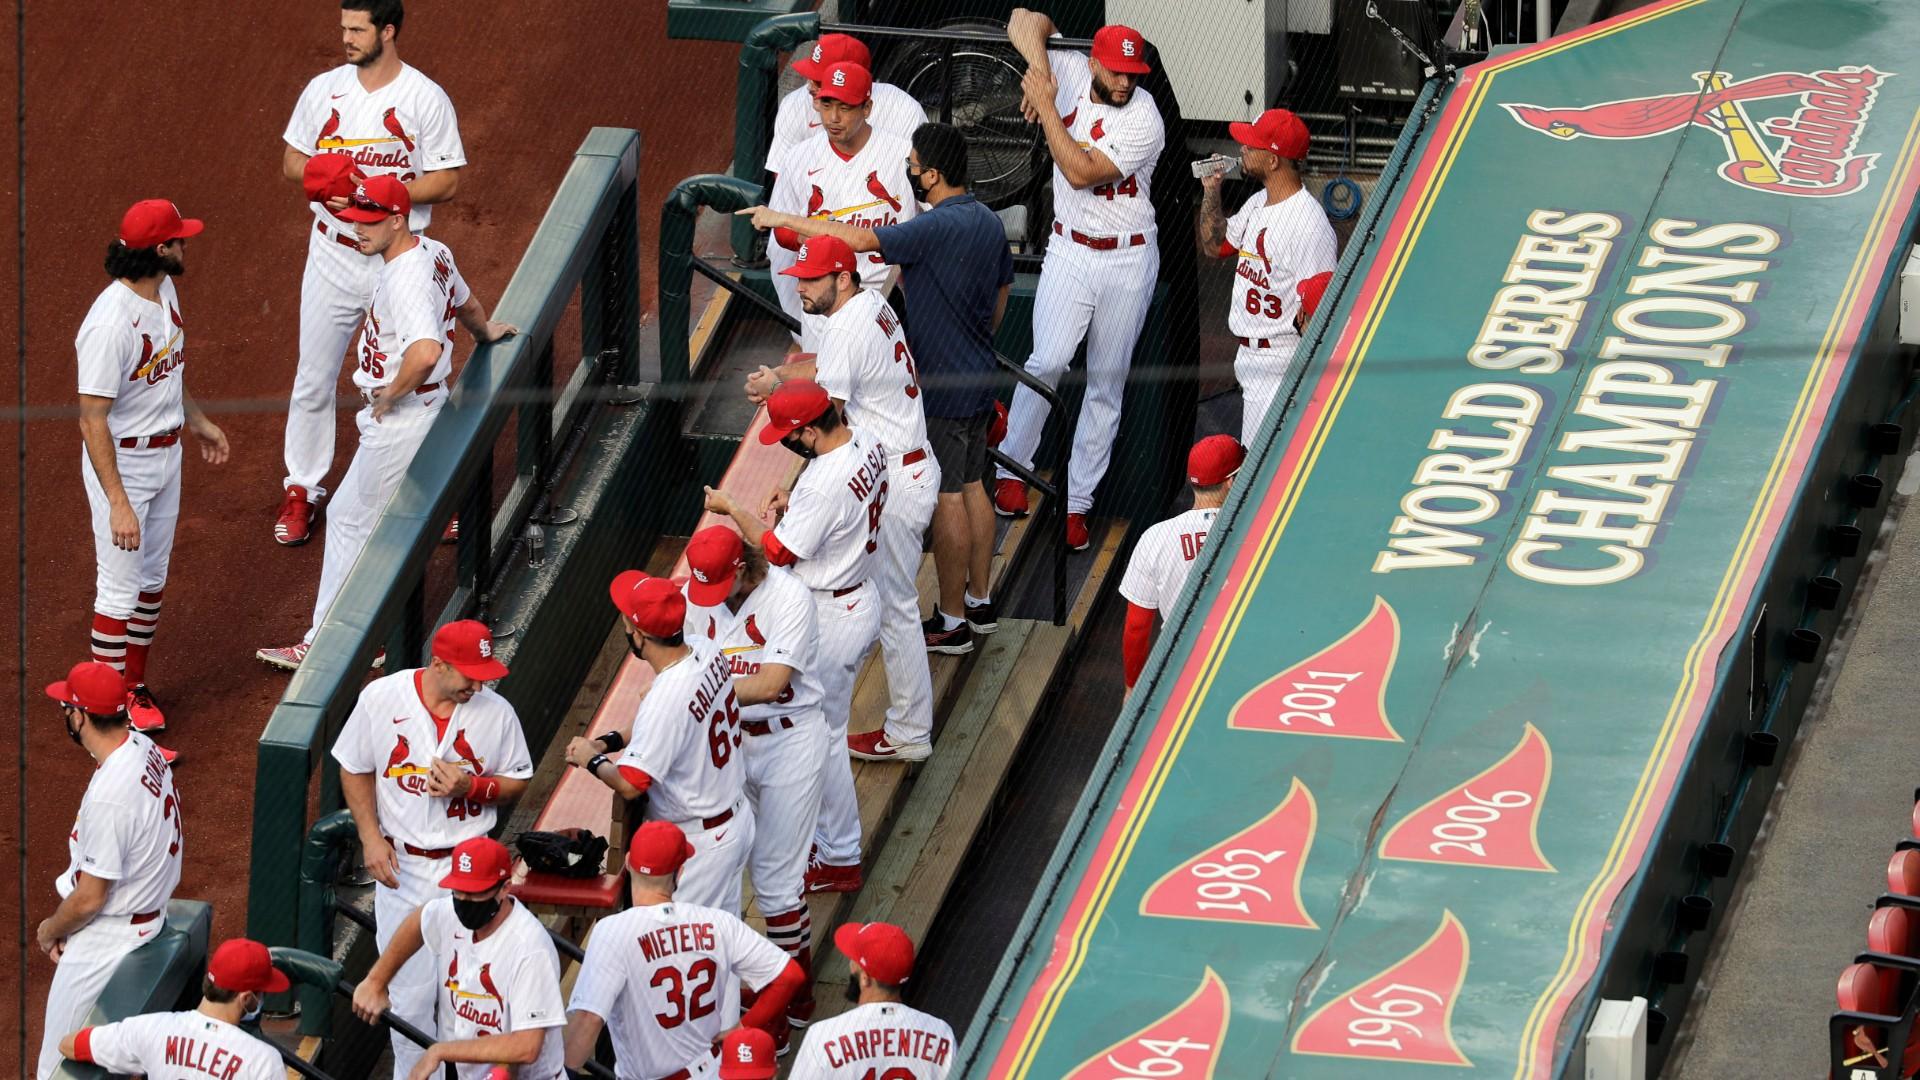 In this July 24, 2020, file photo, members of the St. Louis Cardinals wait to be introduced before the start of a baseball game against the Pittsburgh Pirates in St. Louis. (AP Photo / Jeff Roberson, File)